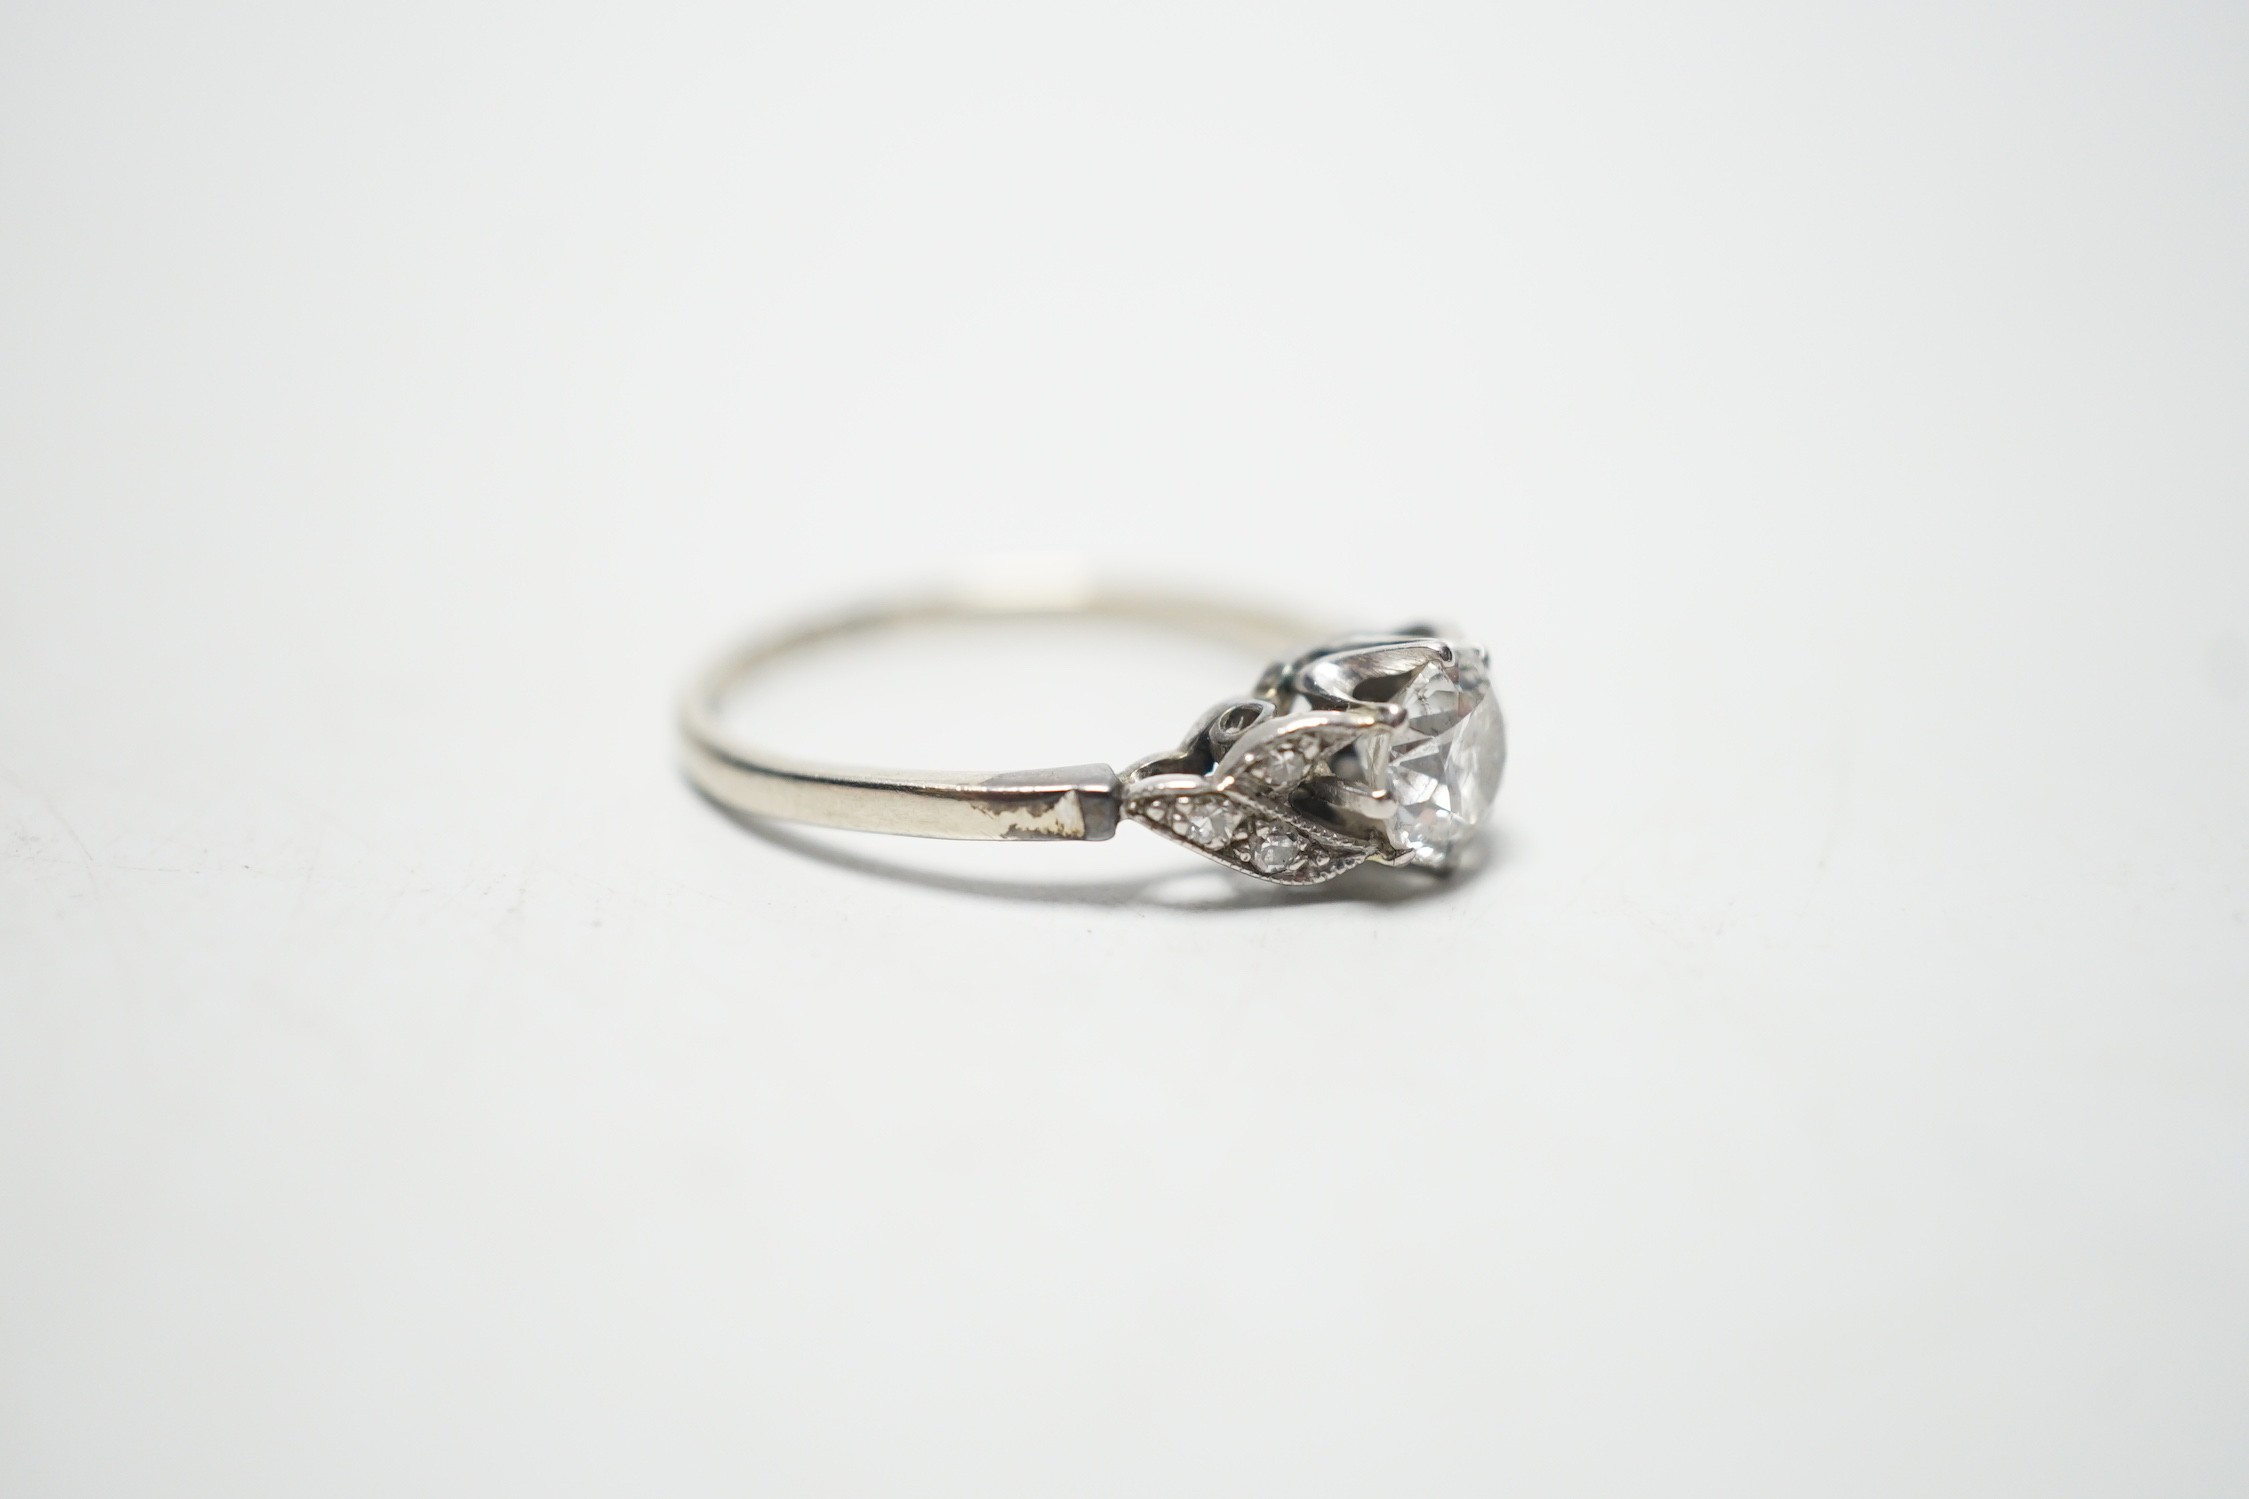 An 18ct white metal and single stone diamond ring, with diamond chip set shoulders, the stone weighing approximately 0.60ct, size M, gross weight 1.8 grams.